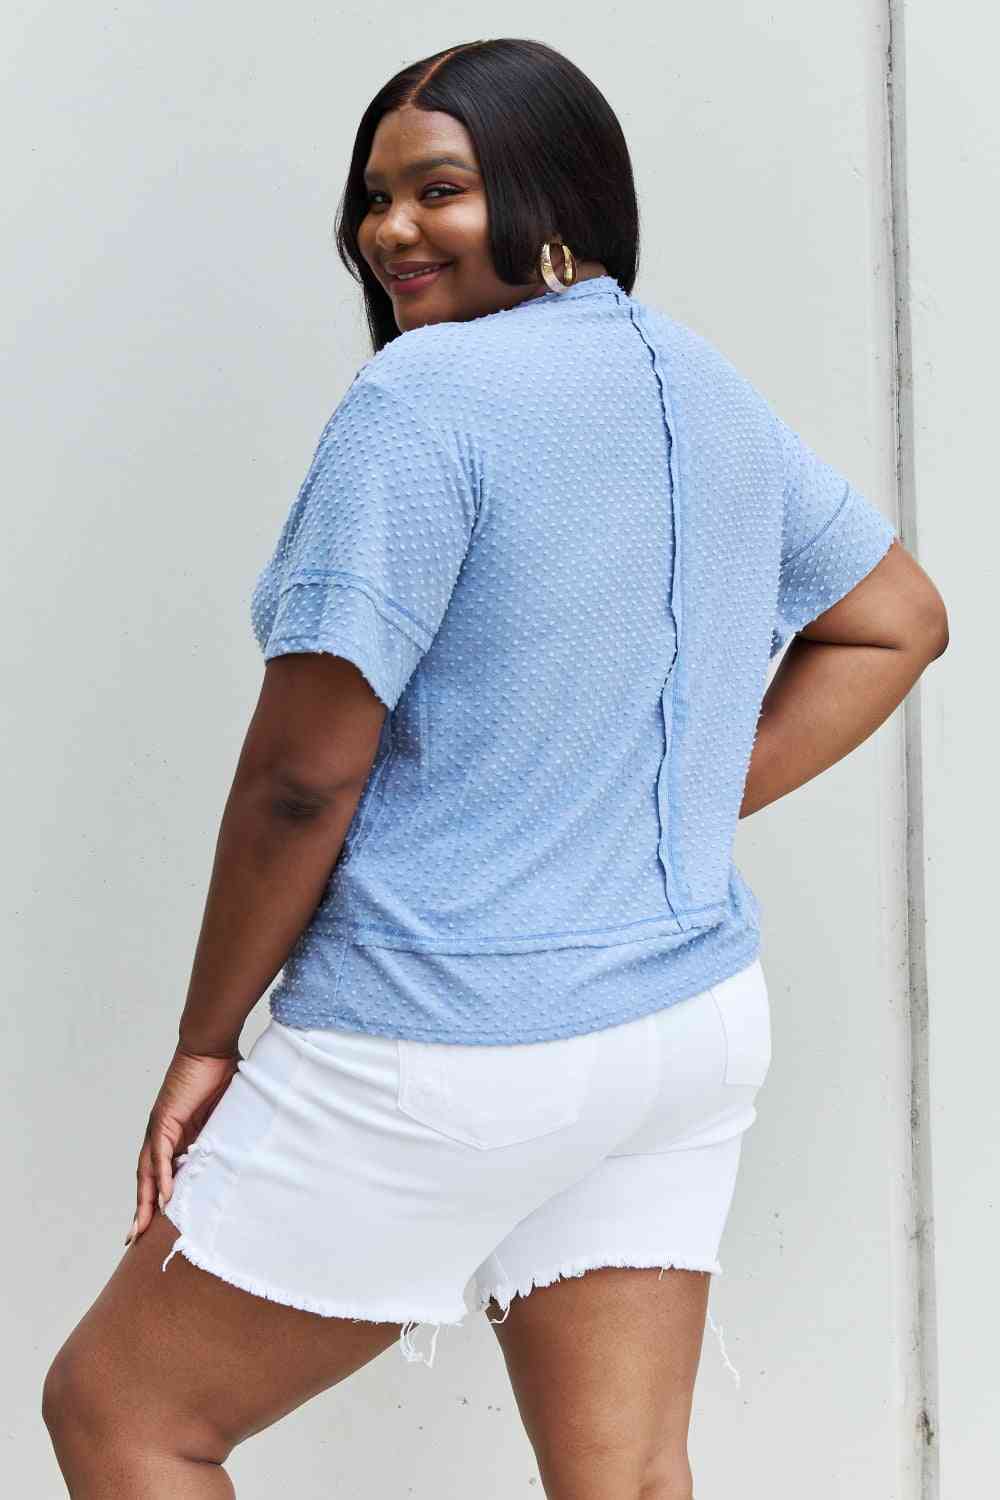 Cater 2 You Swiss Dot Reverse Stitch Short Sleeve Top - Camis & Tops - Shirts & Tops - 6 - 2024